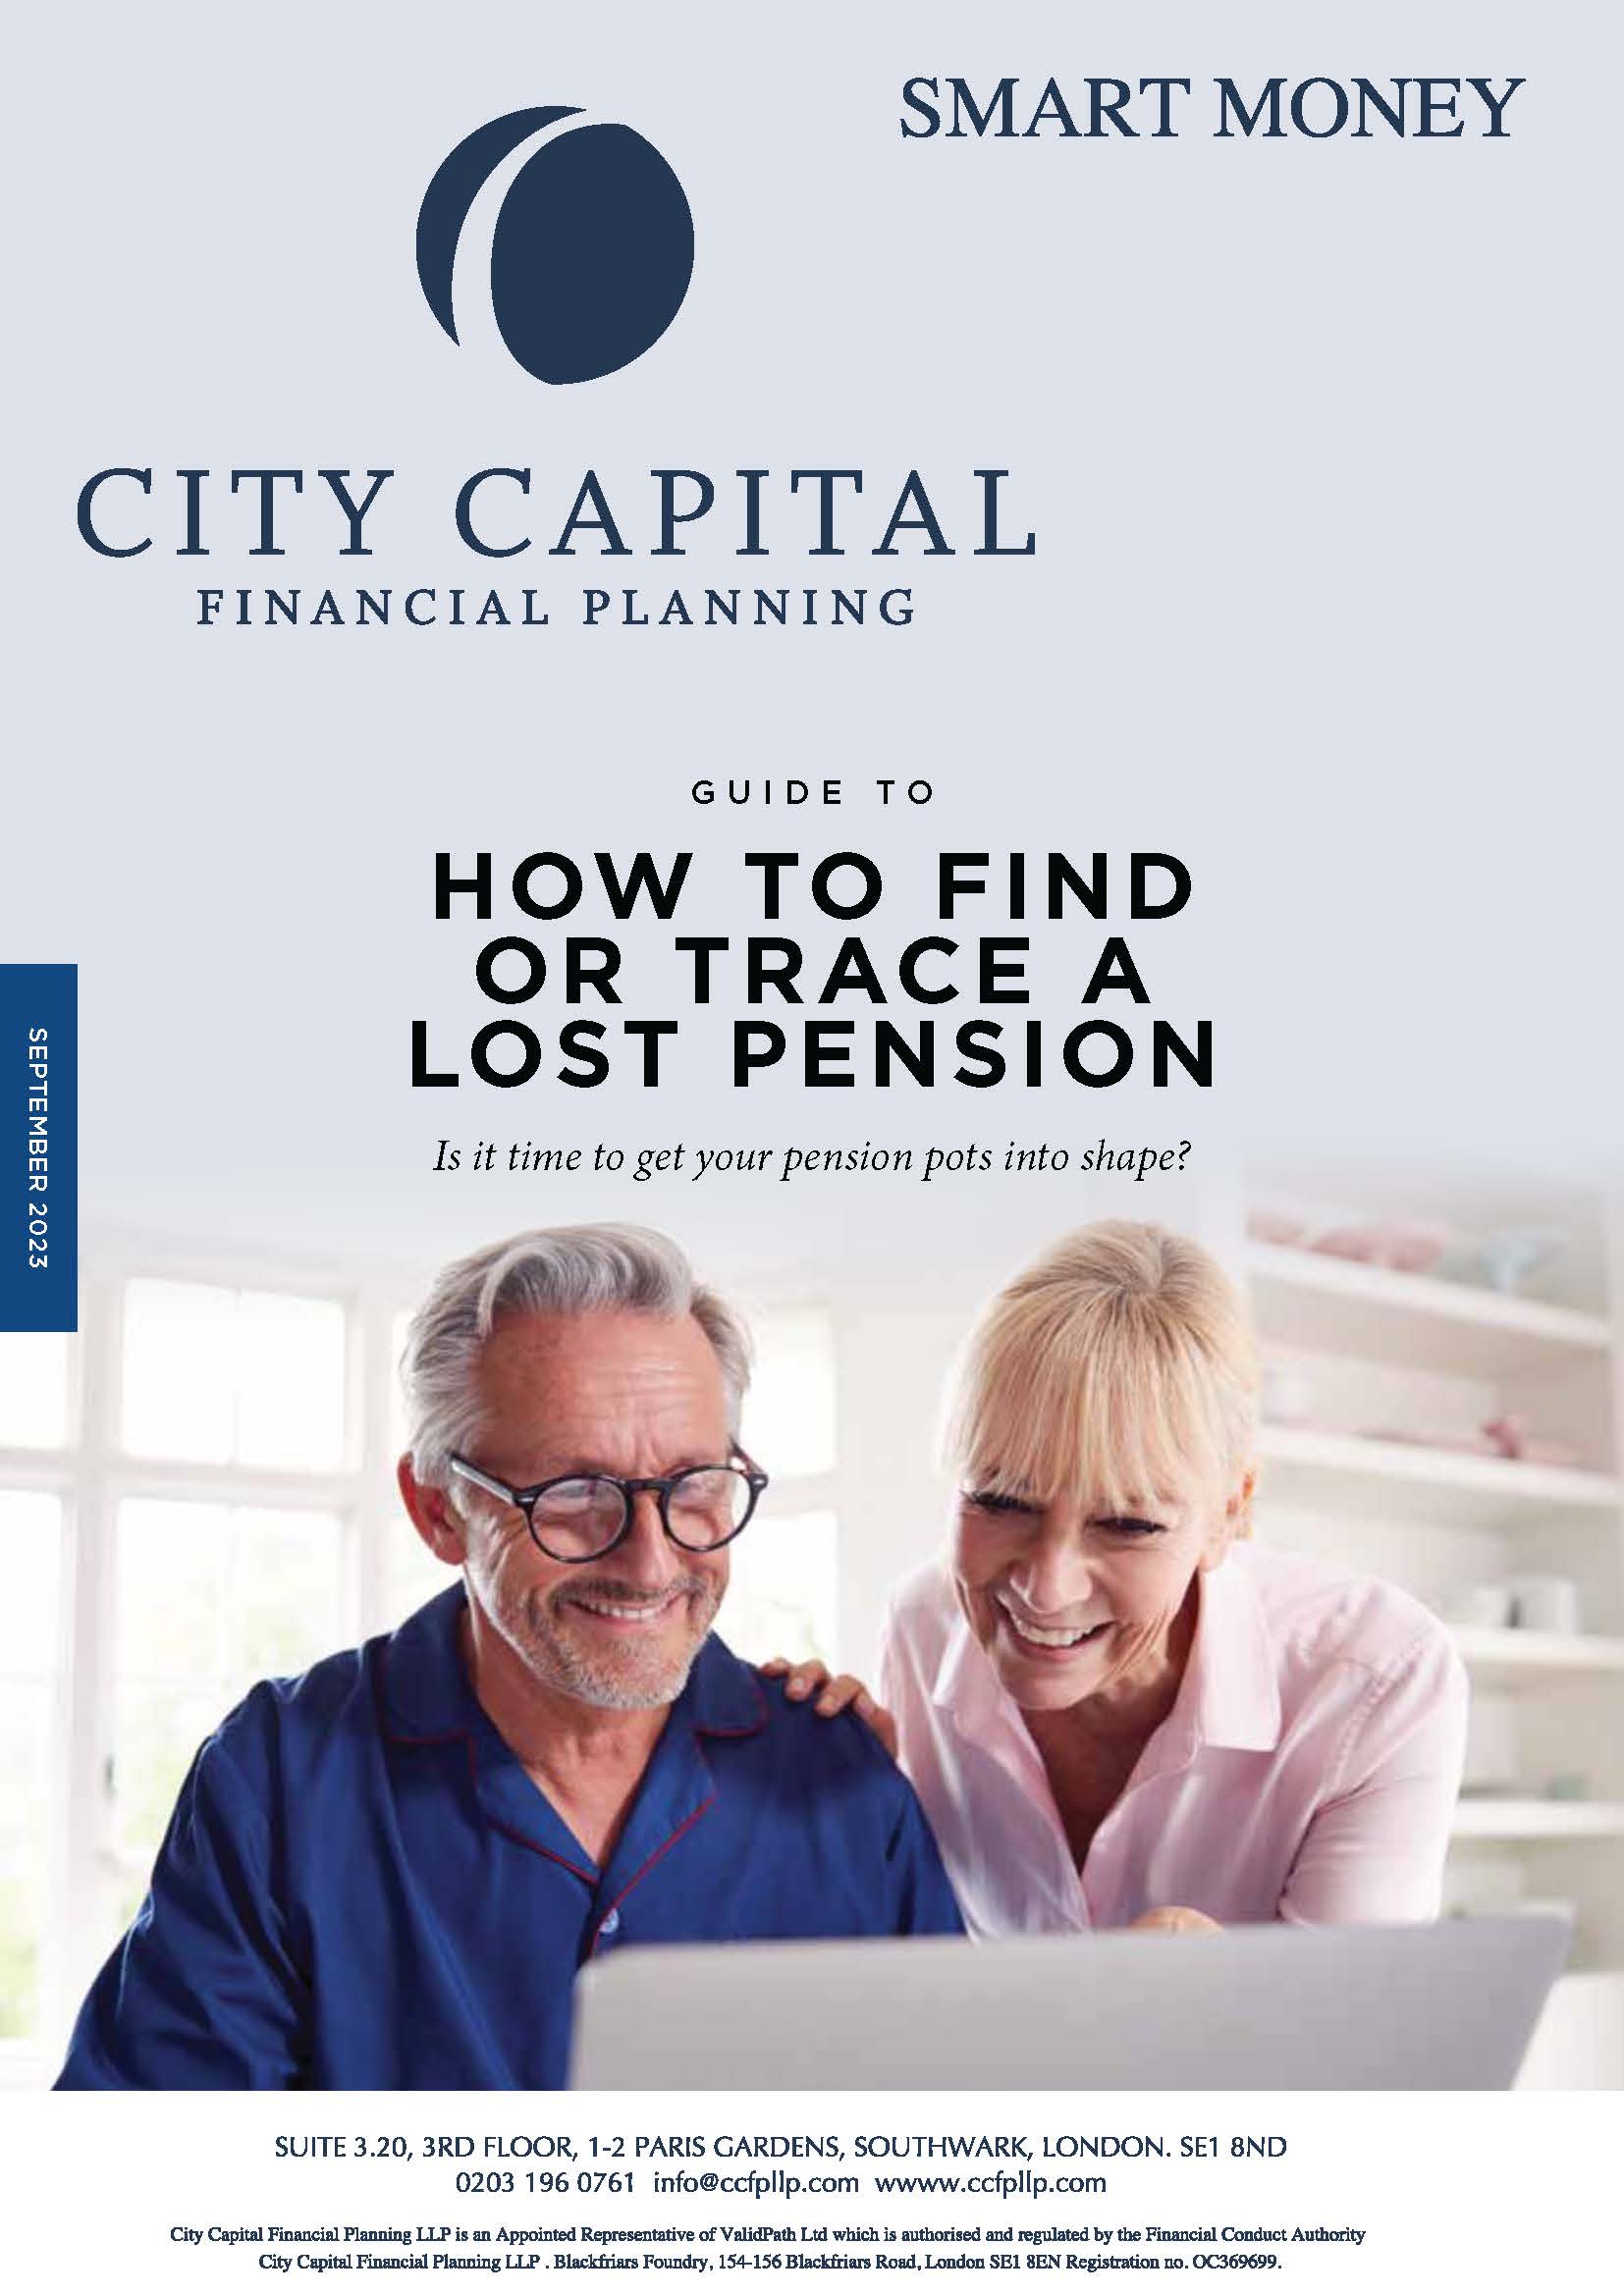 Guide to How to Find or Trace a Lost Pension